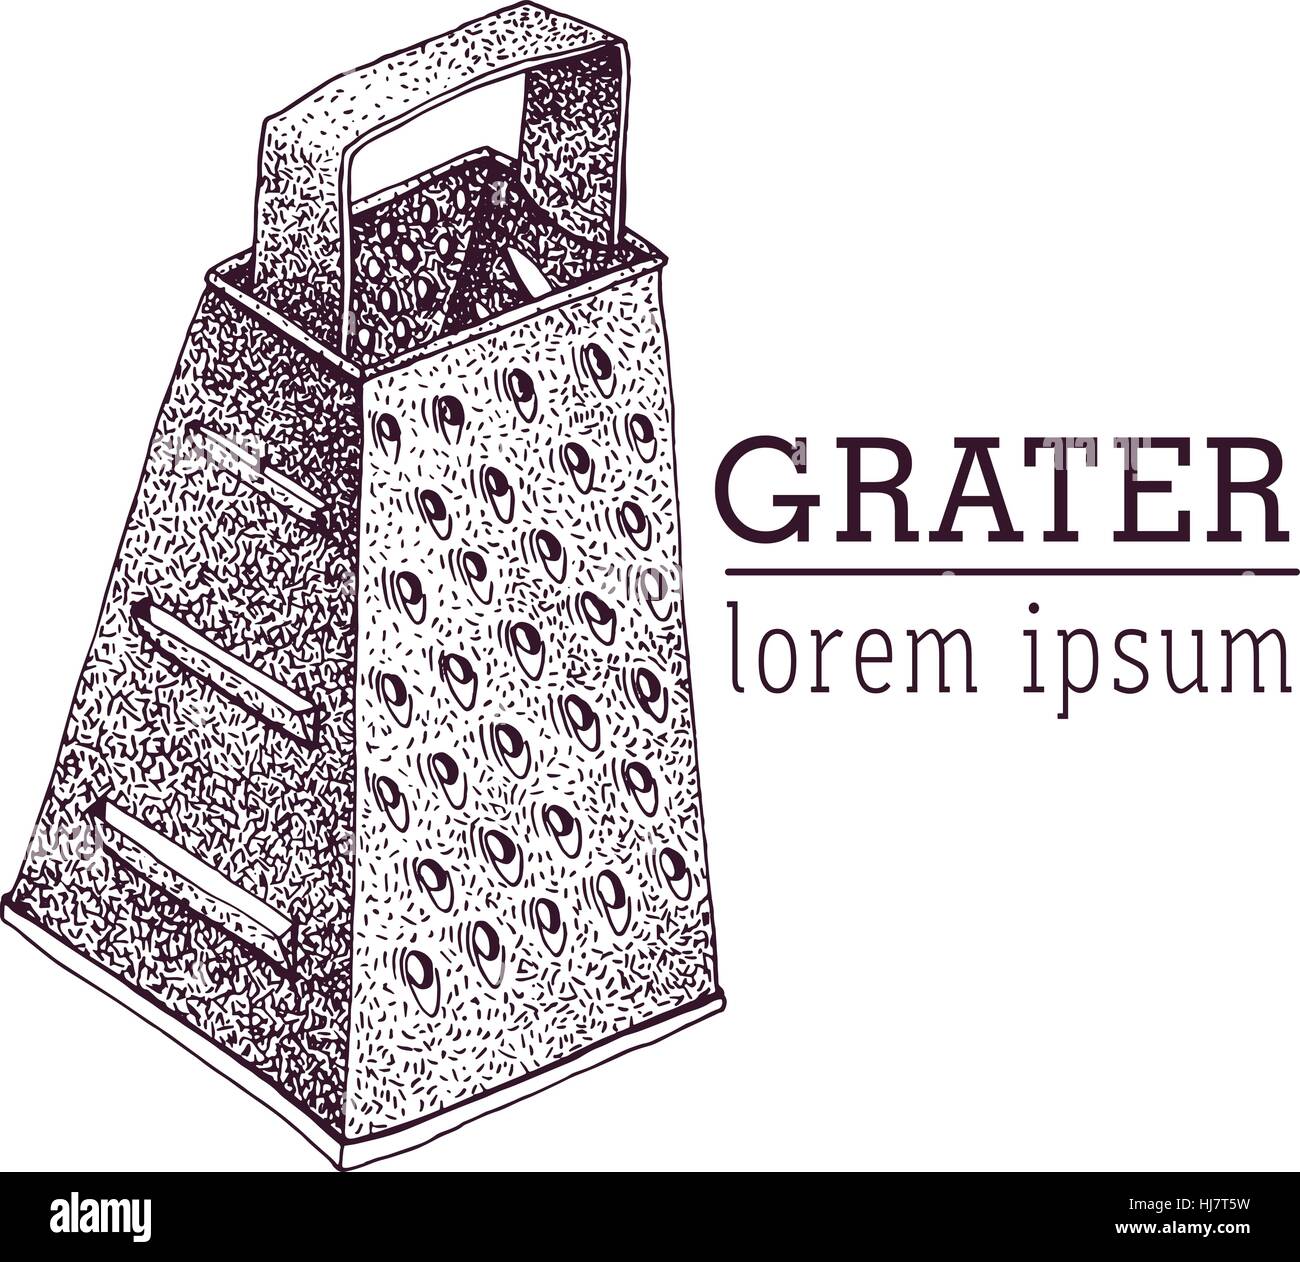 How to Draw Cheese Grater